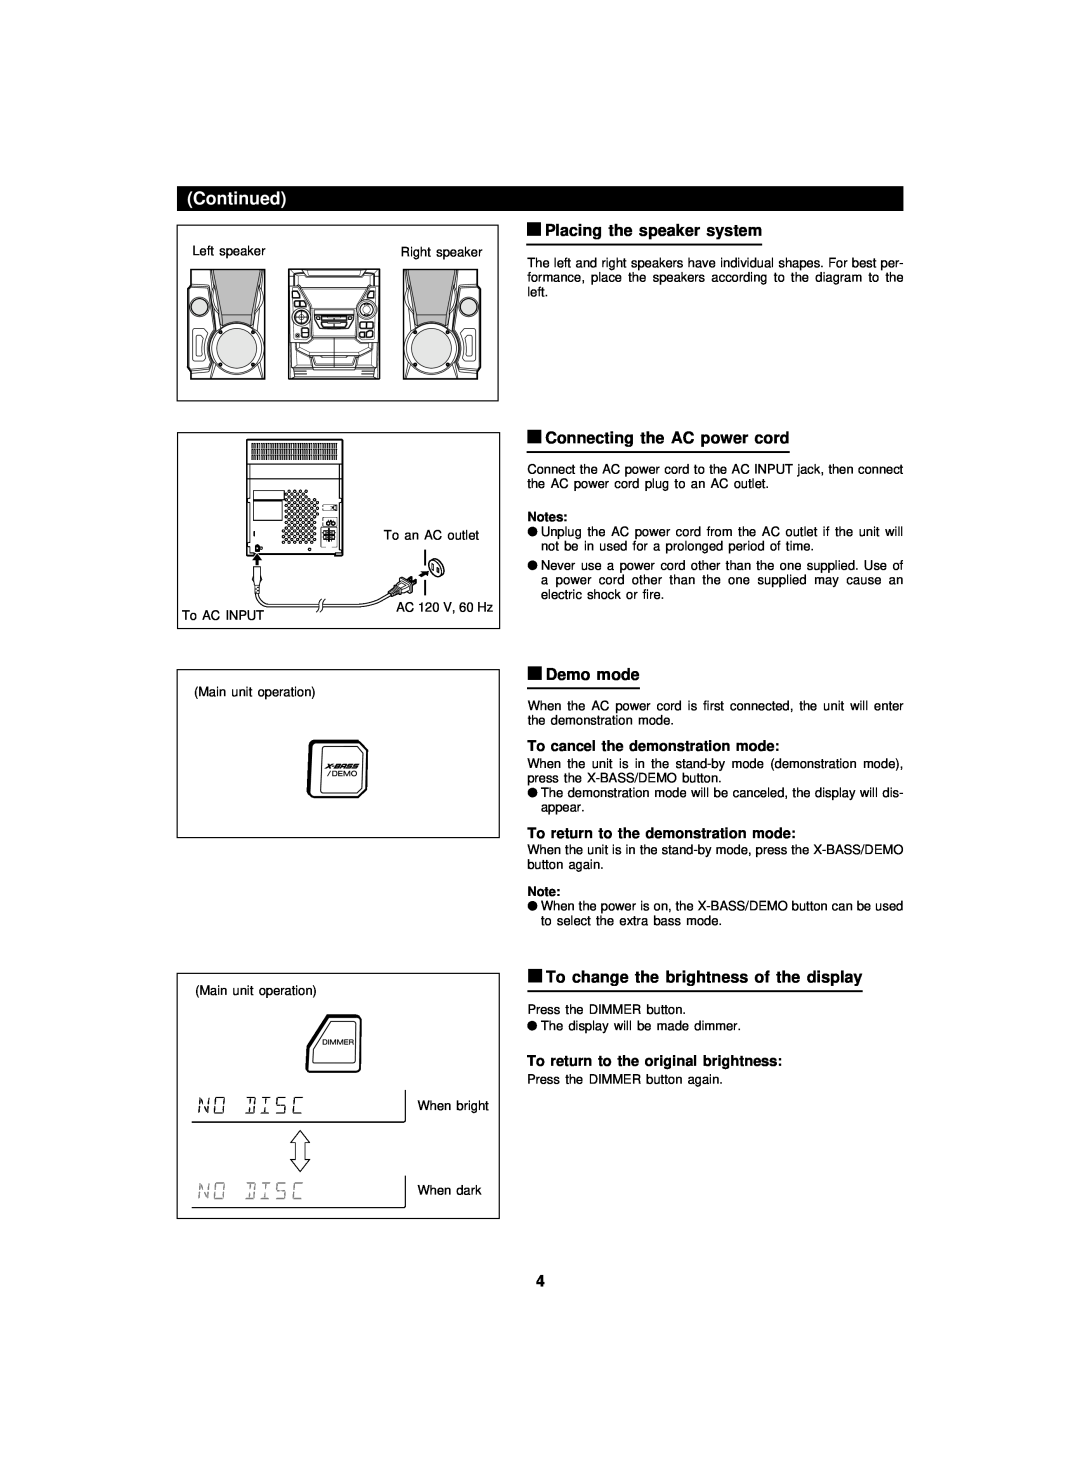 Sharp CP-BA150, CD-BA150 operation manual Continued, To cancel the demonstration mode, To return to the demonstration mode 